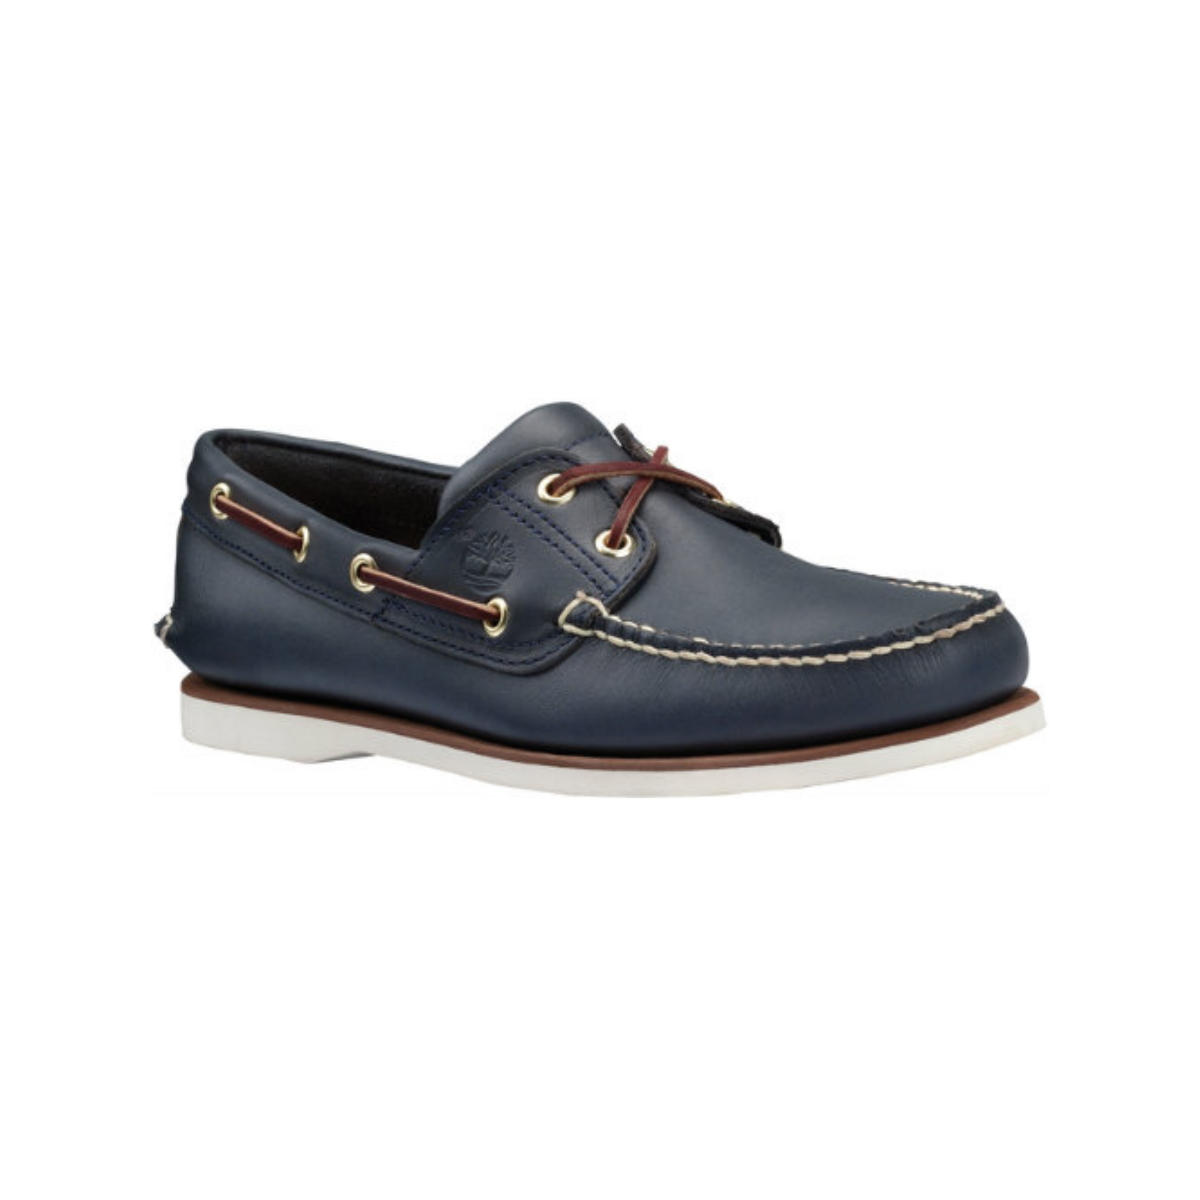 Timberland Classic Boat chaussures bateau homme navy eu 43,5 ( us 9,5 )